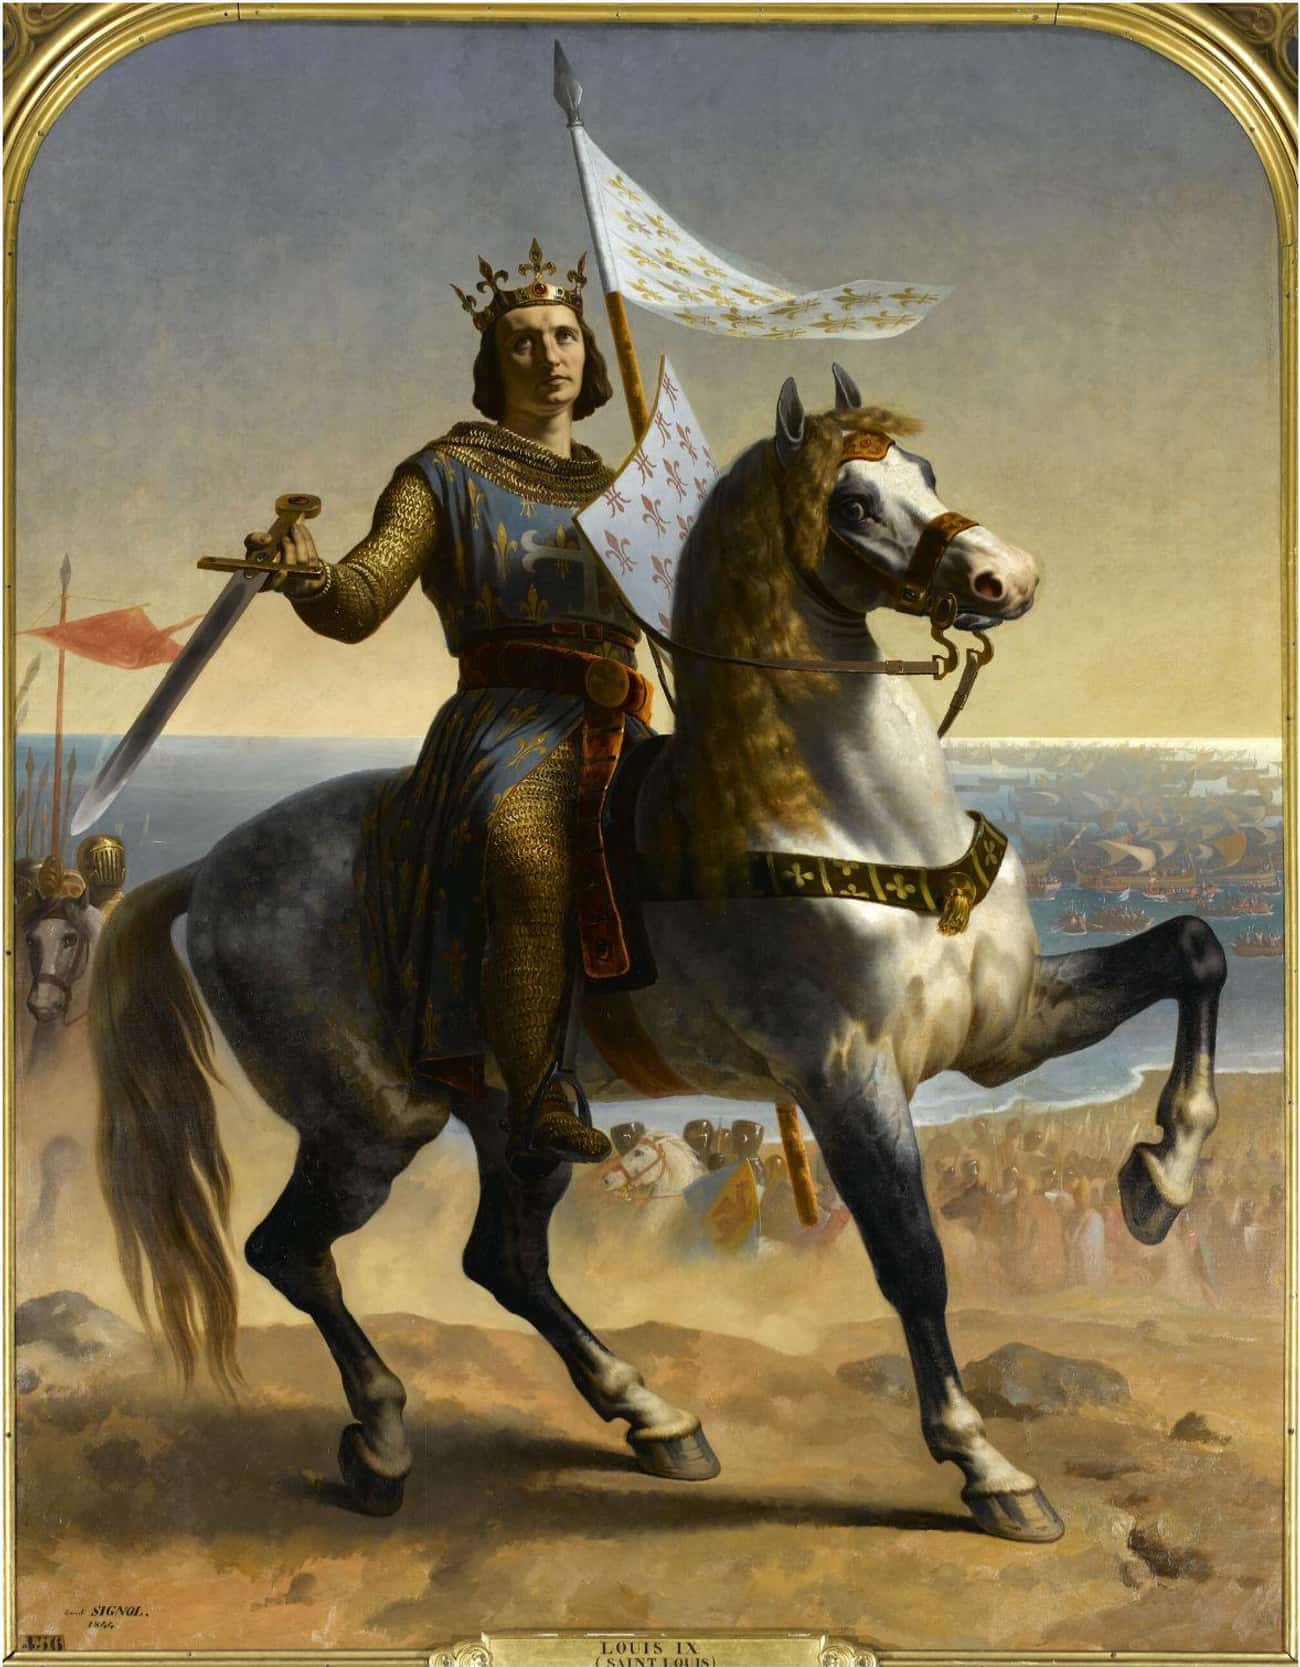 Louis IX Of France Said He'd Rather Have A Scot Come Rule Than His Son Govern'